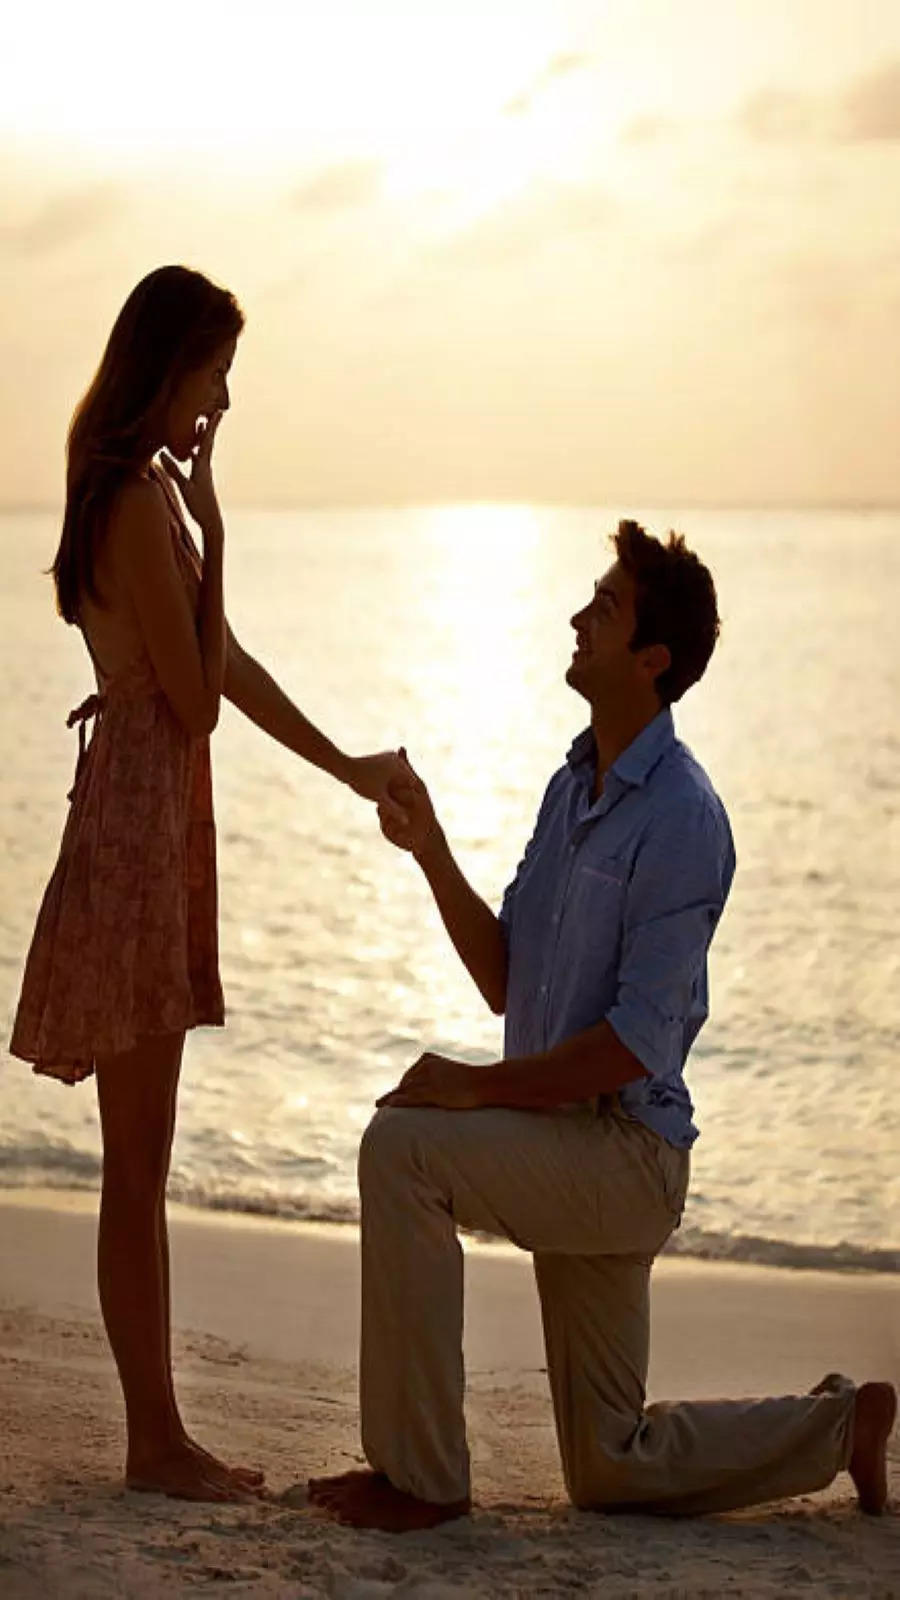 India Propose Places: Places in India to propose your partner this ...